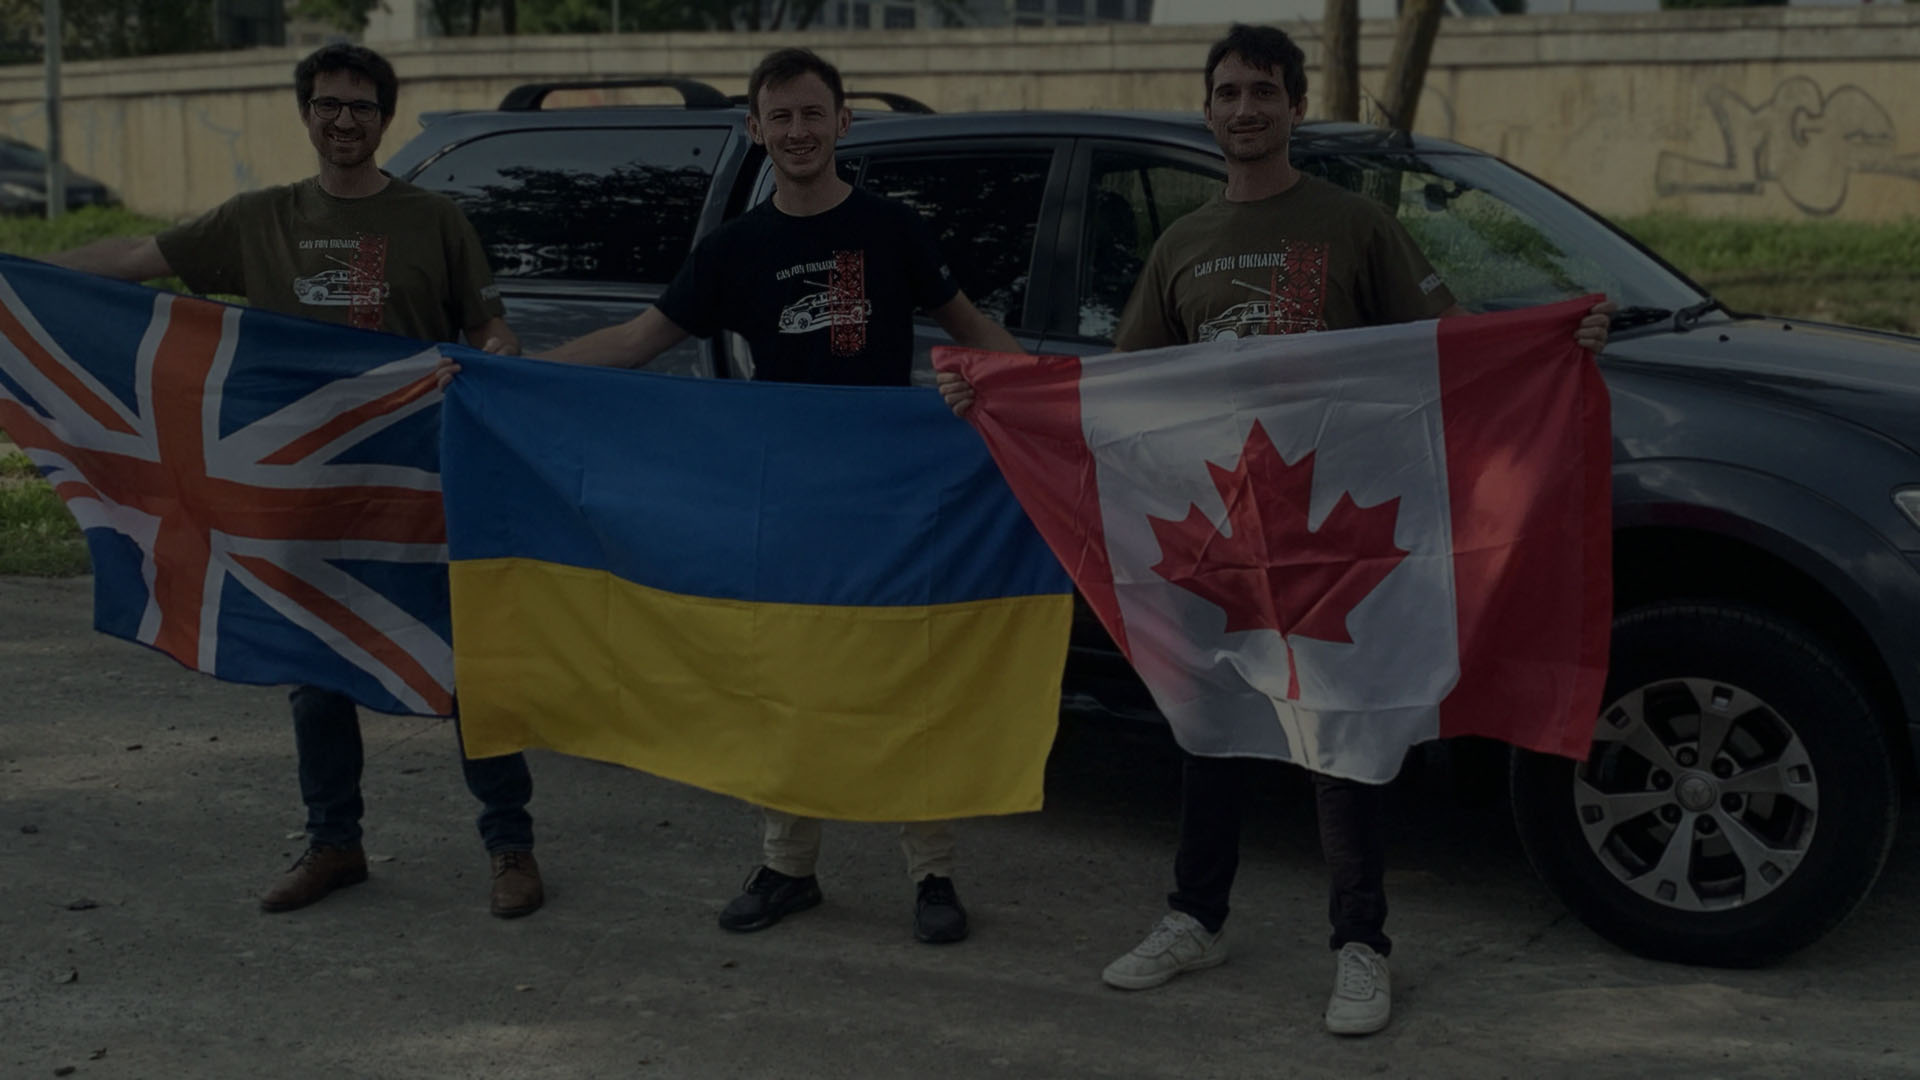 Two brothers and Ivan Oleksii stand in front of two donated SUV pickup trucks holding British, Ukrainian, and Canadian flags.